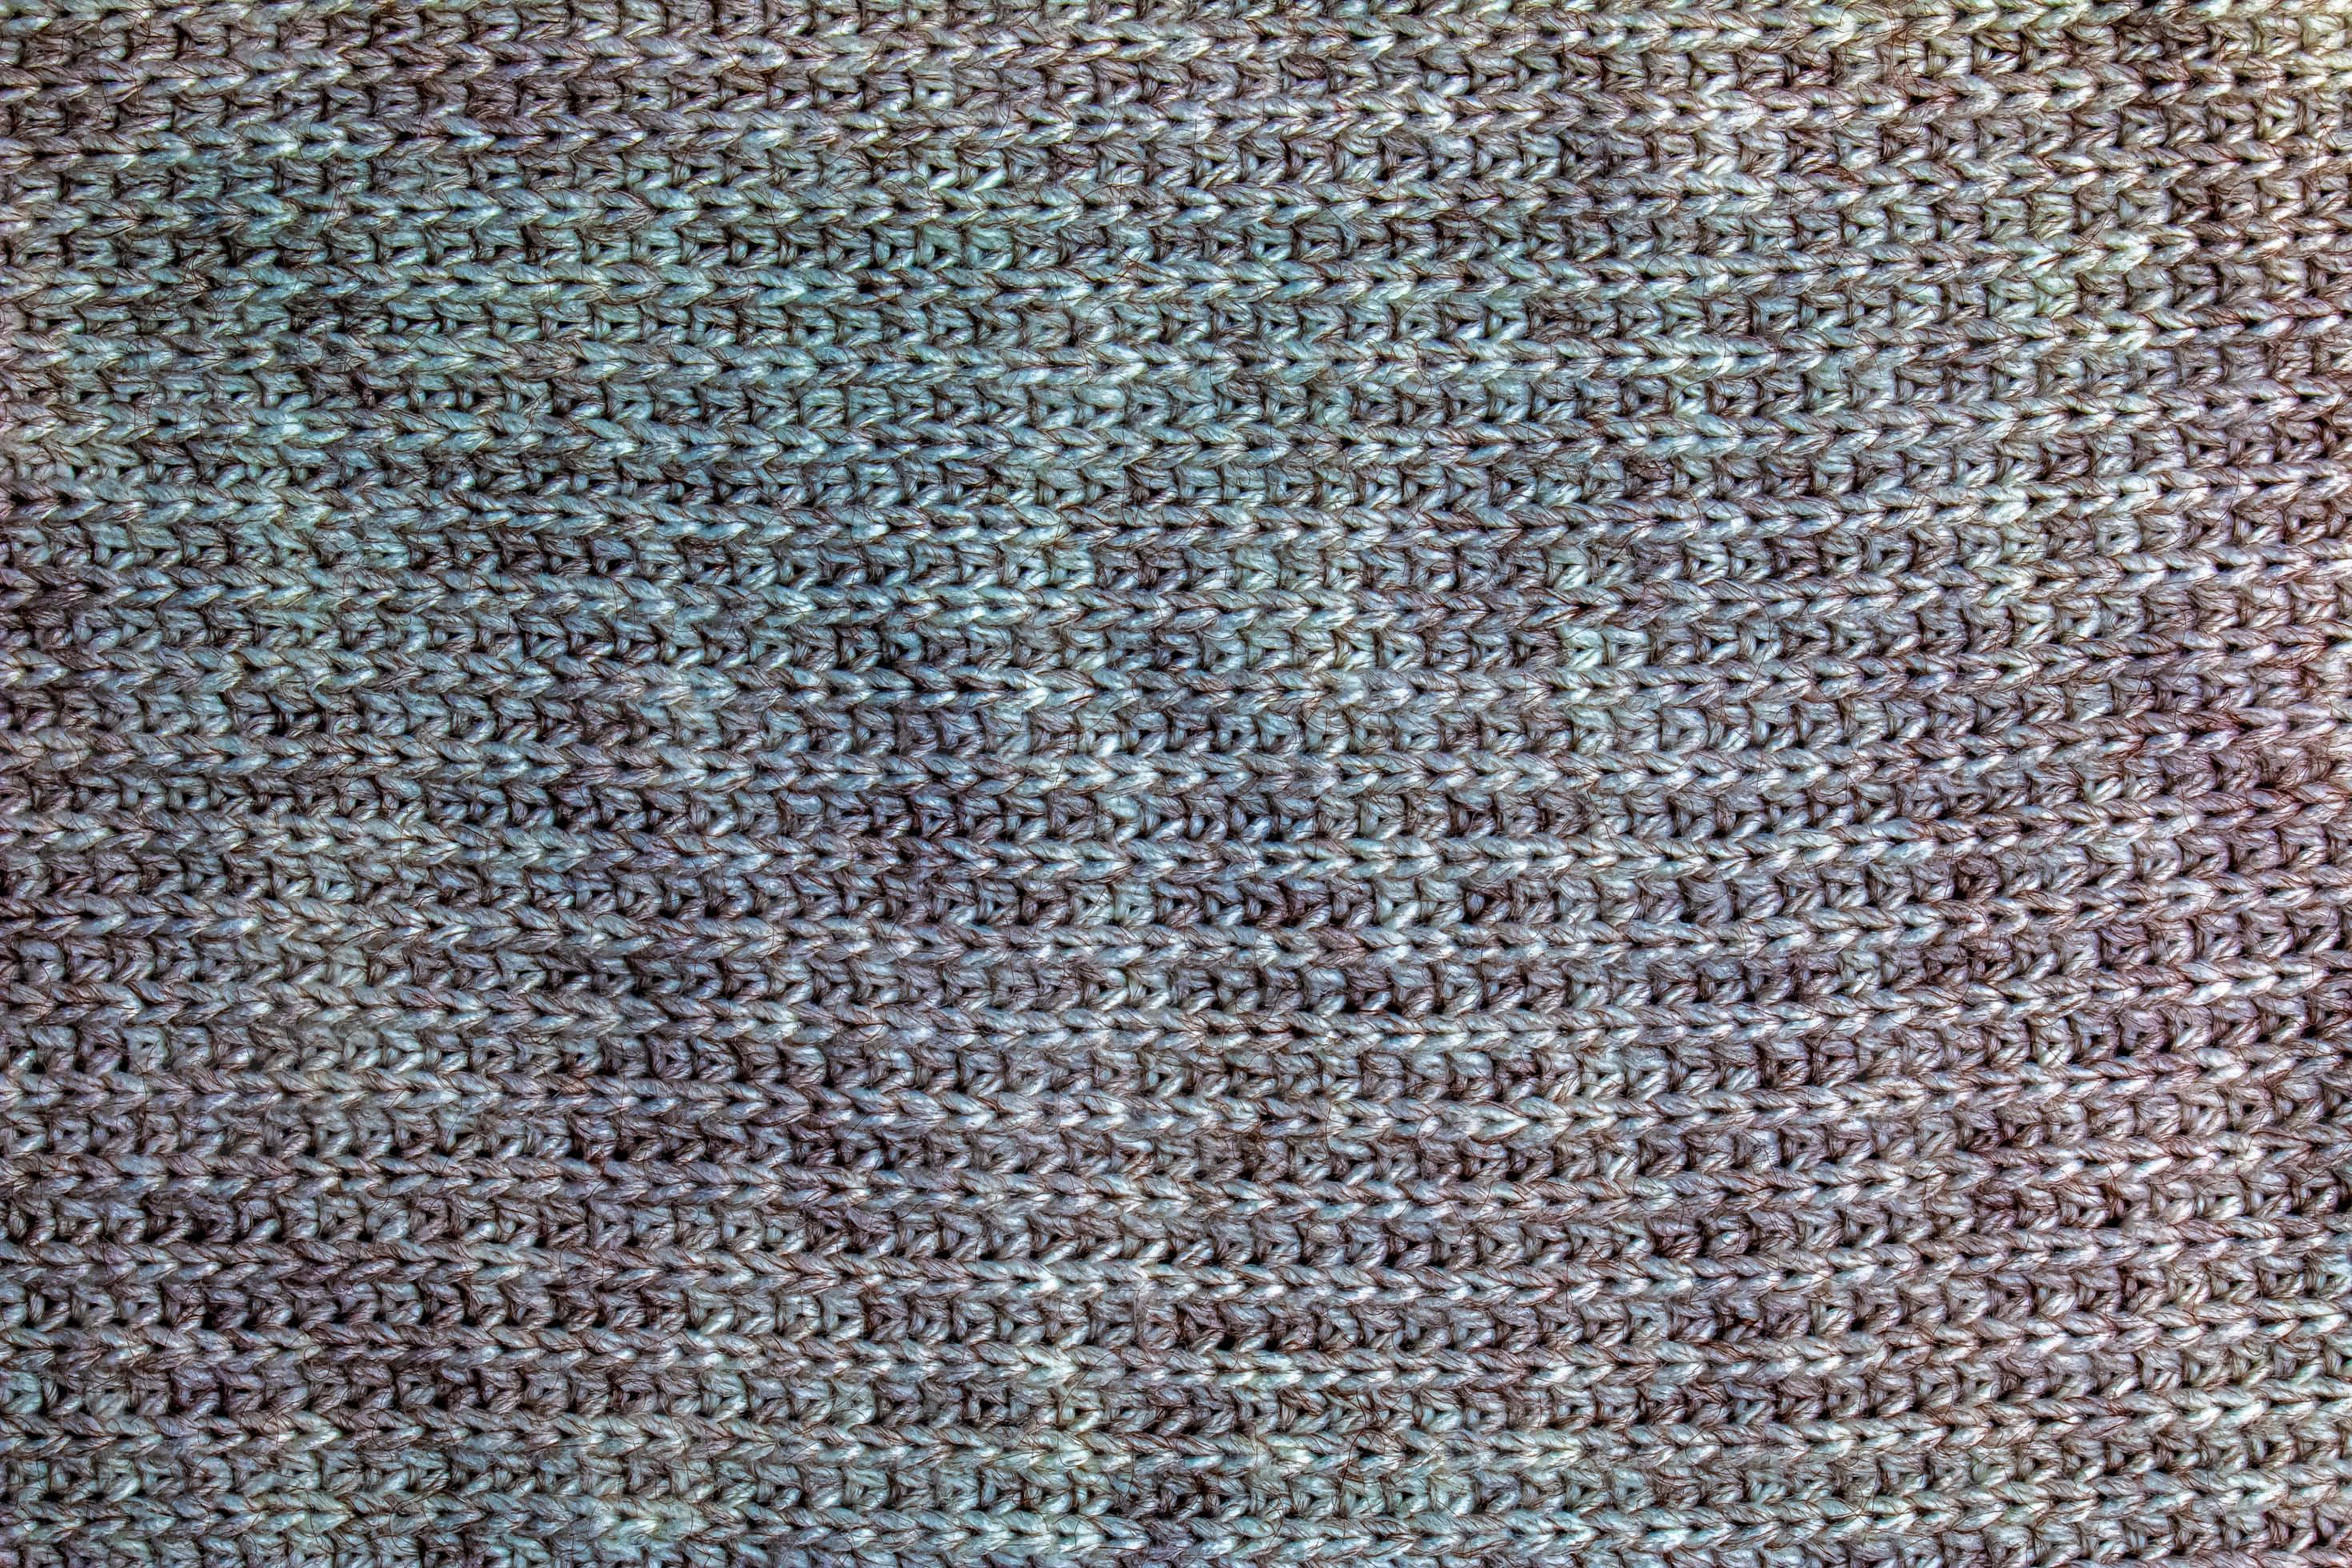 Close-up Cozy Knitted Wool Texture Wallpaper